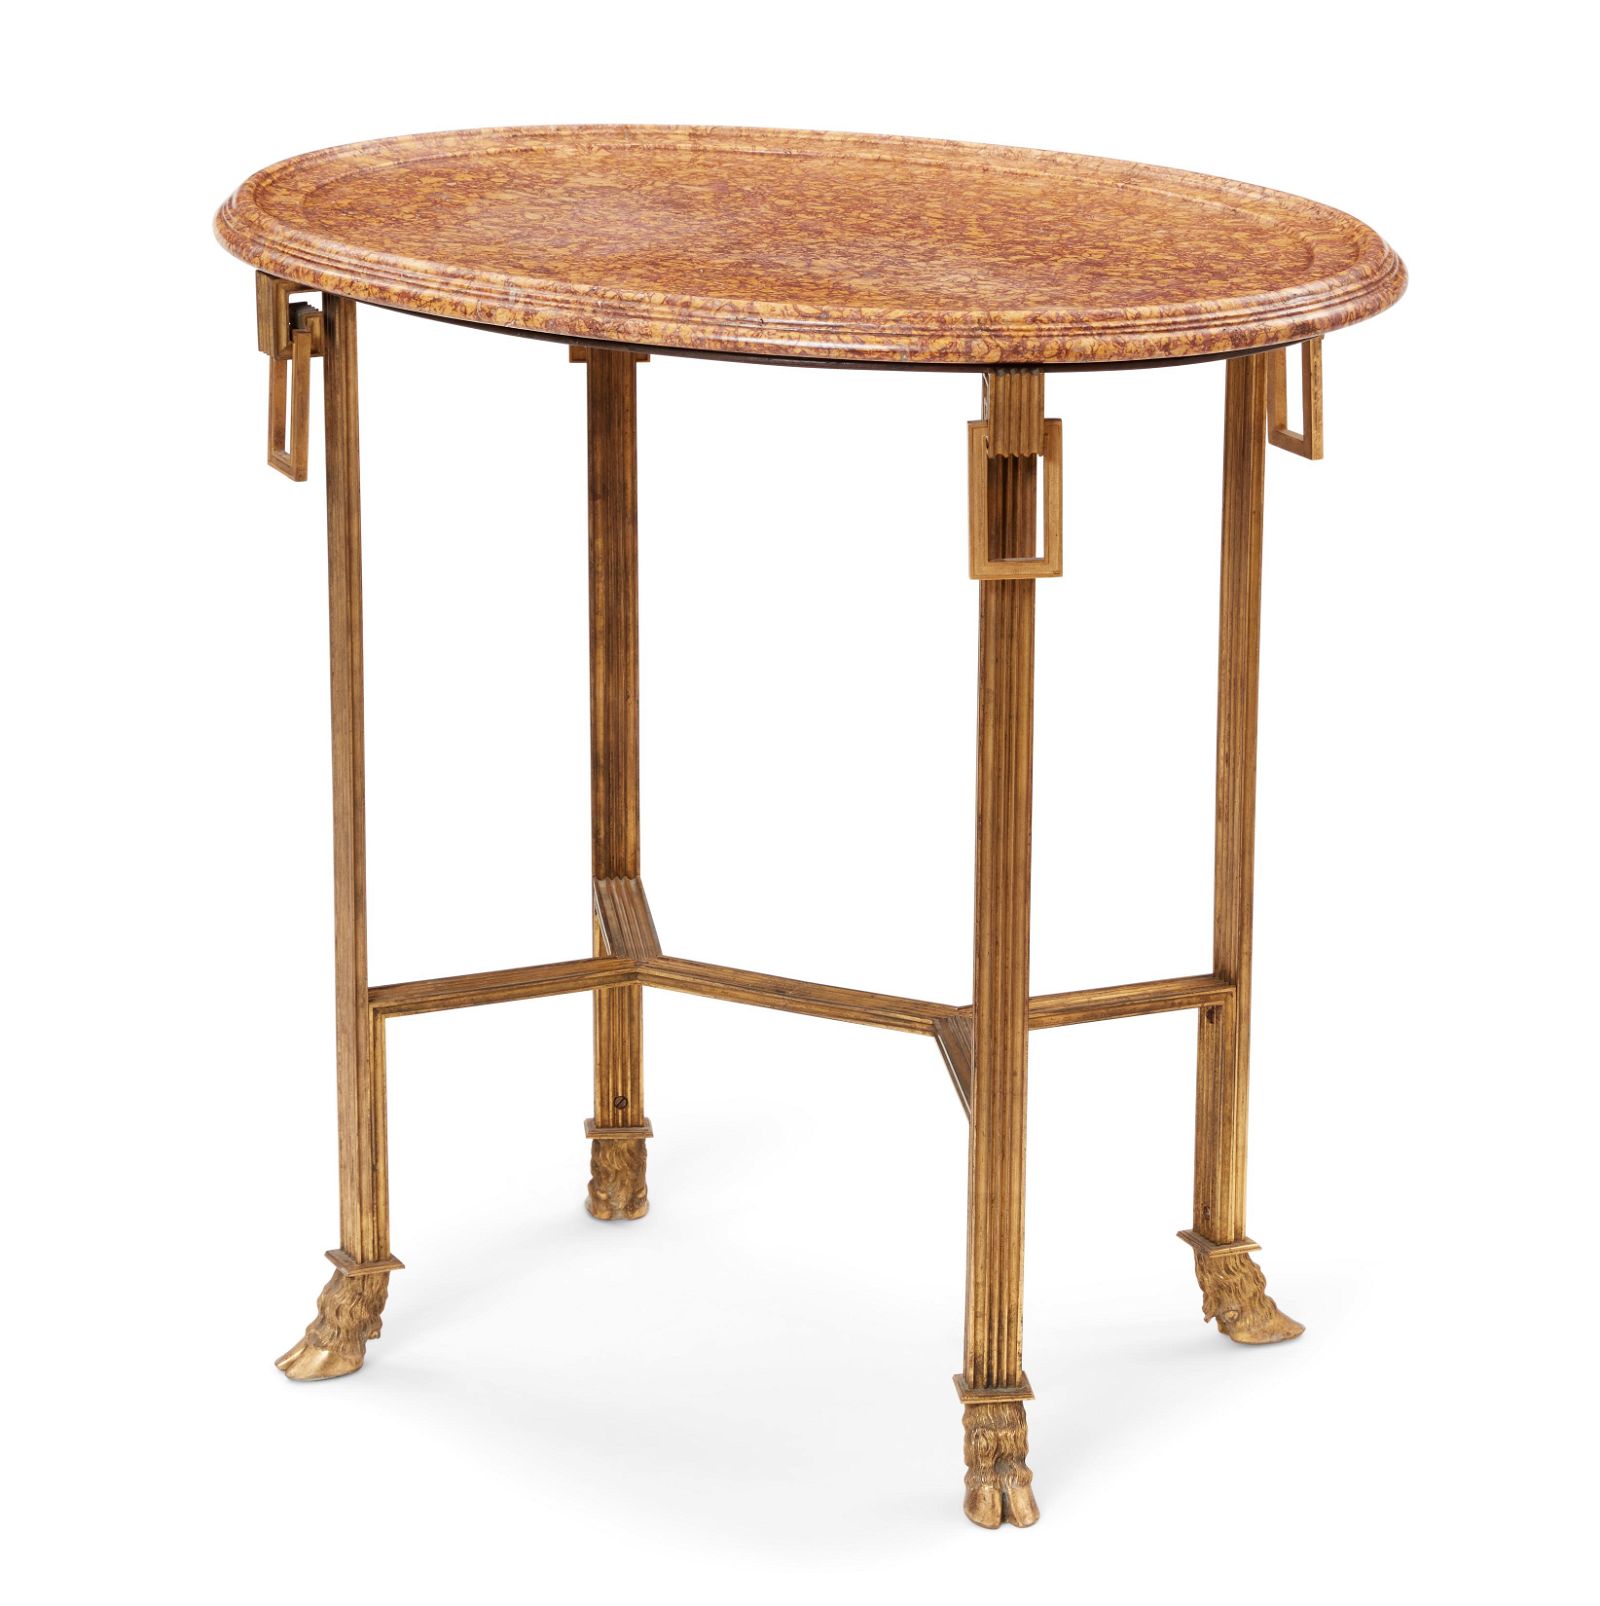 NEOCLASSICAL GILT BRONZE OVAL TABLE,